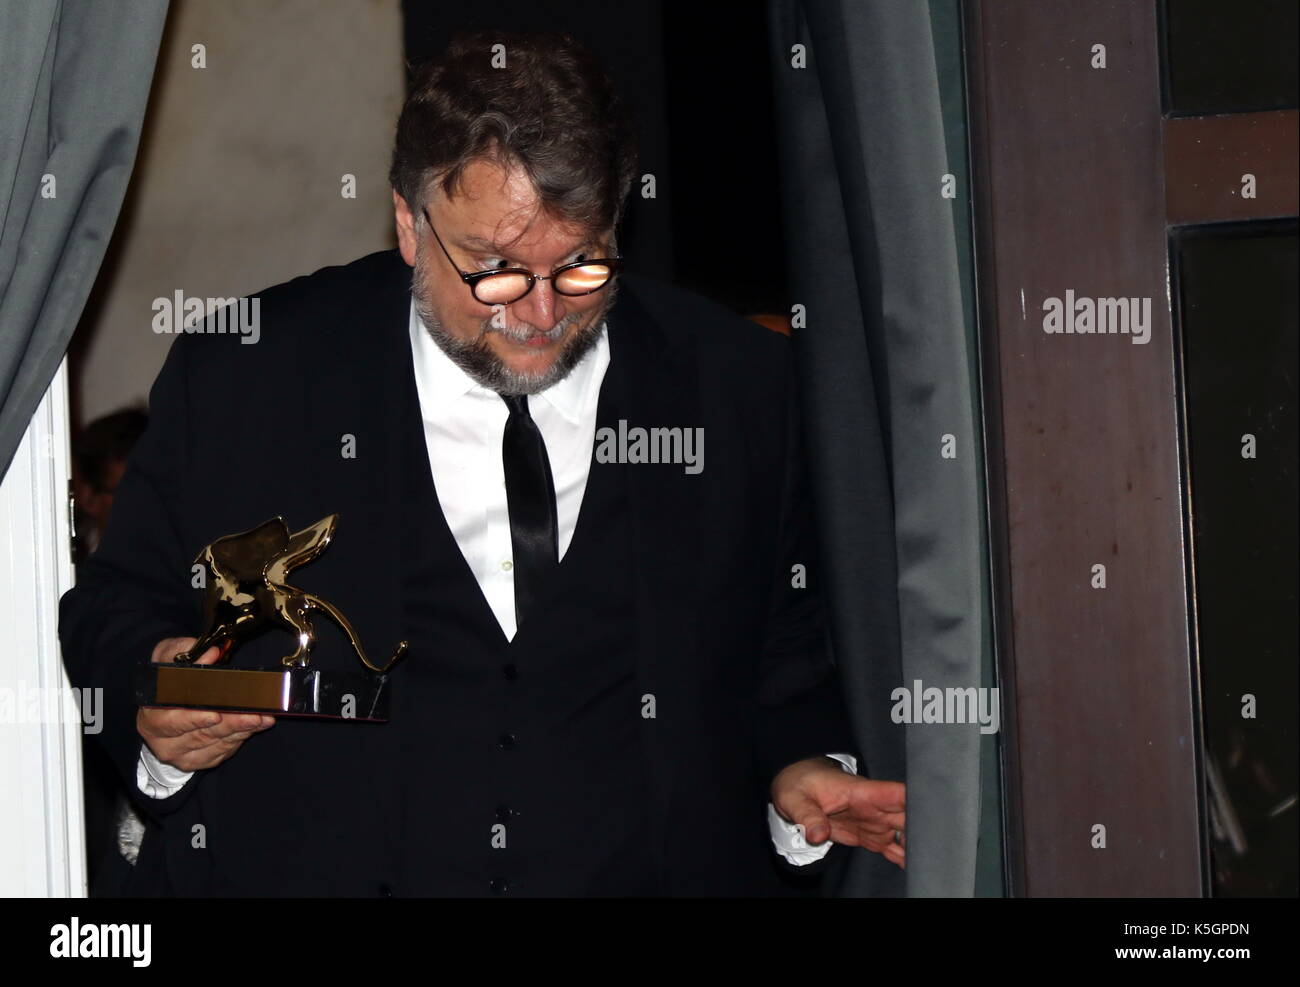 Venice, Italy. 9th September, 2017. Director Guillermo Del Toro arrives during a award photocall after he receives the Golden Lion for Best Film with the movie 'The Shape of Water' during the 74th Venice International Film Festival at Lido of Venice on 9th September, 2017. Credit: Andrea Spinelli/Alamy Live News Stock Photo